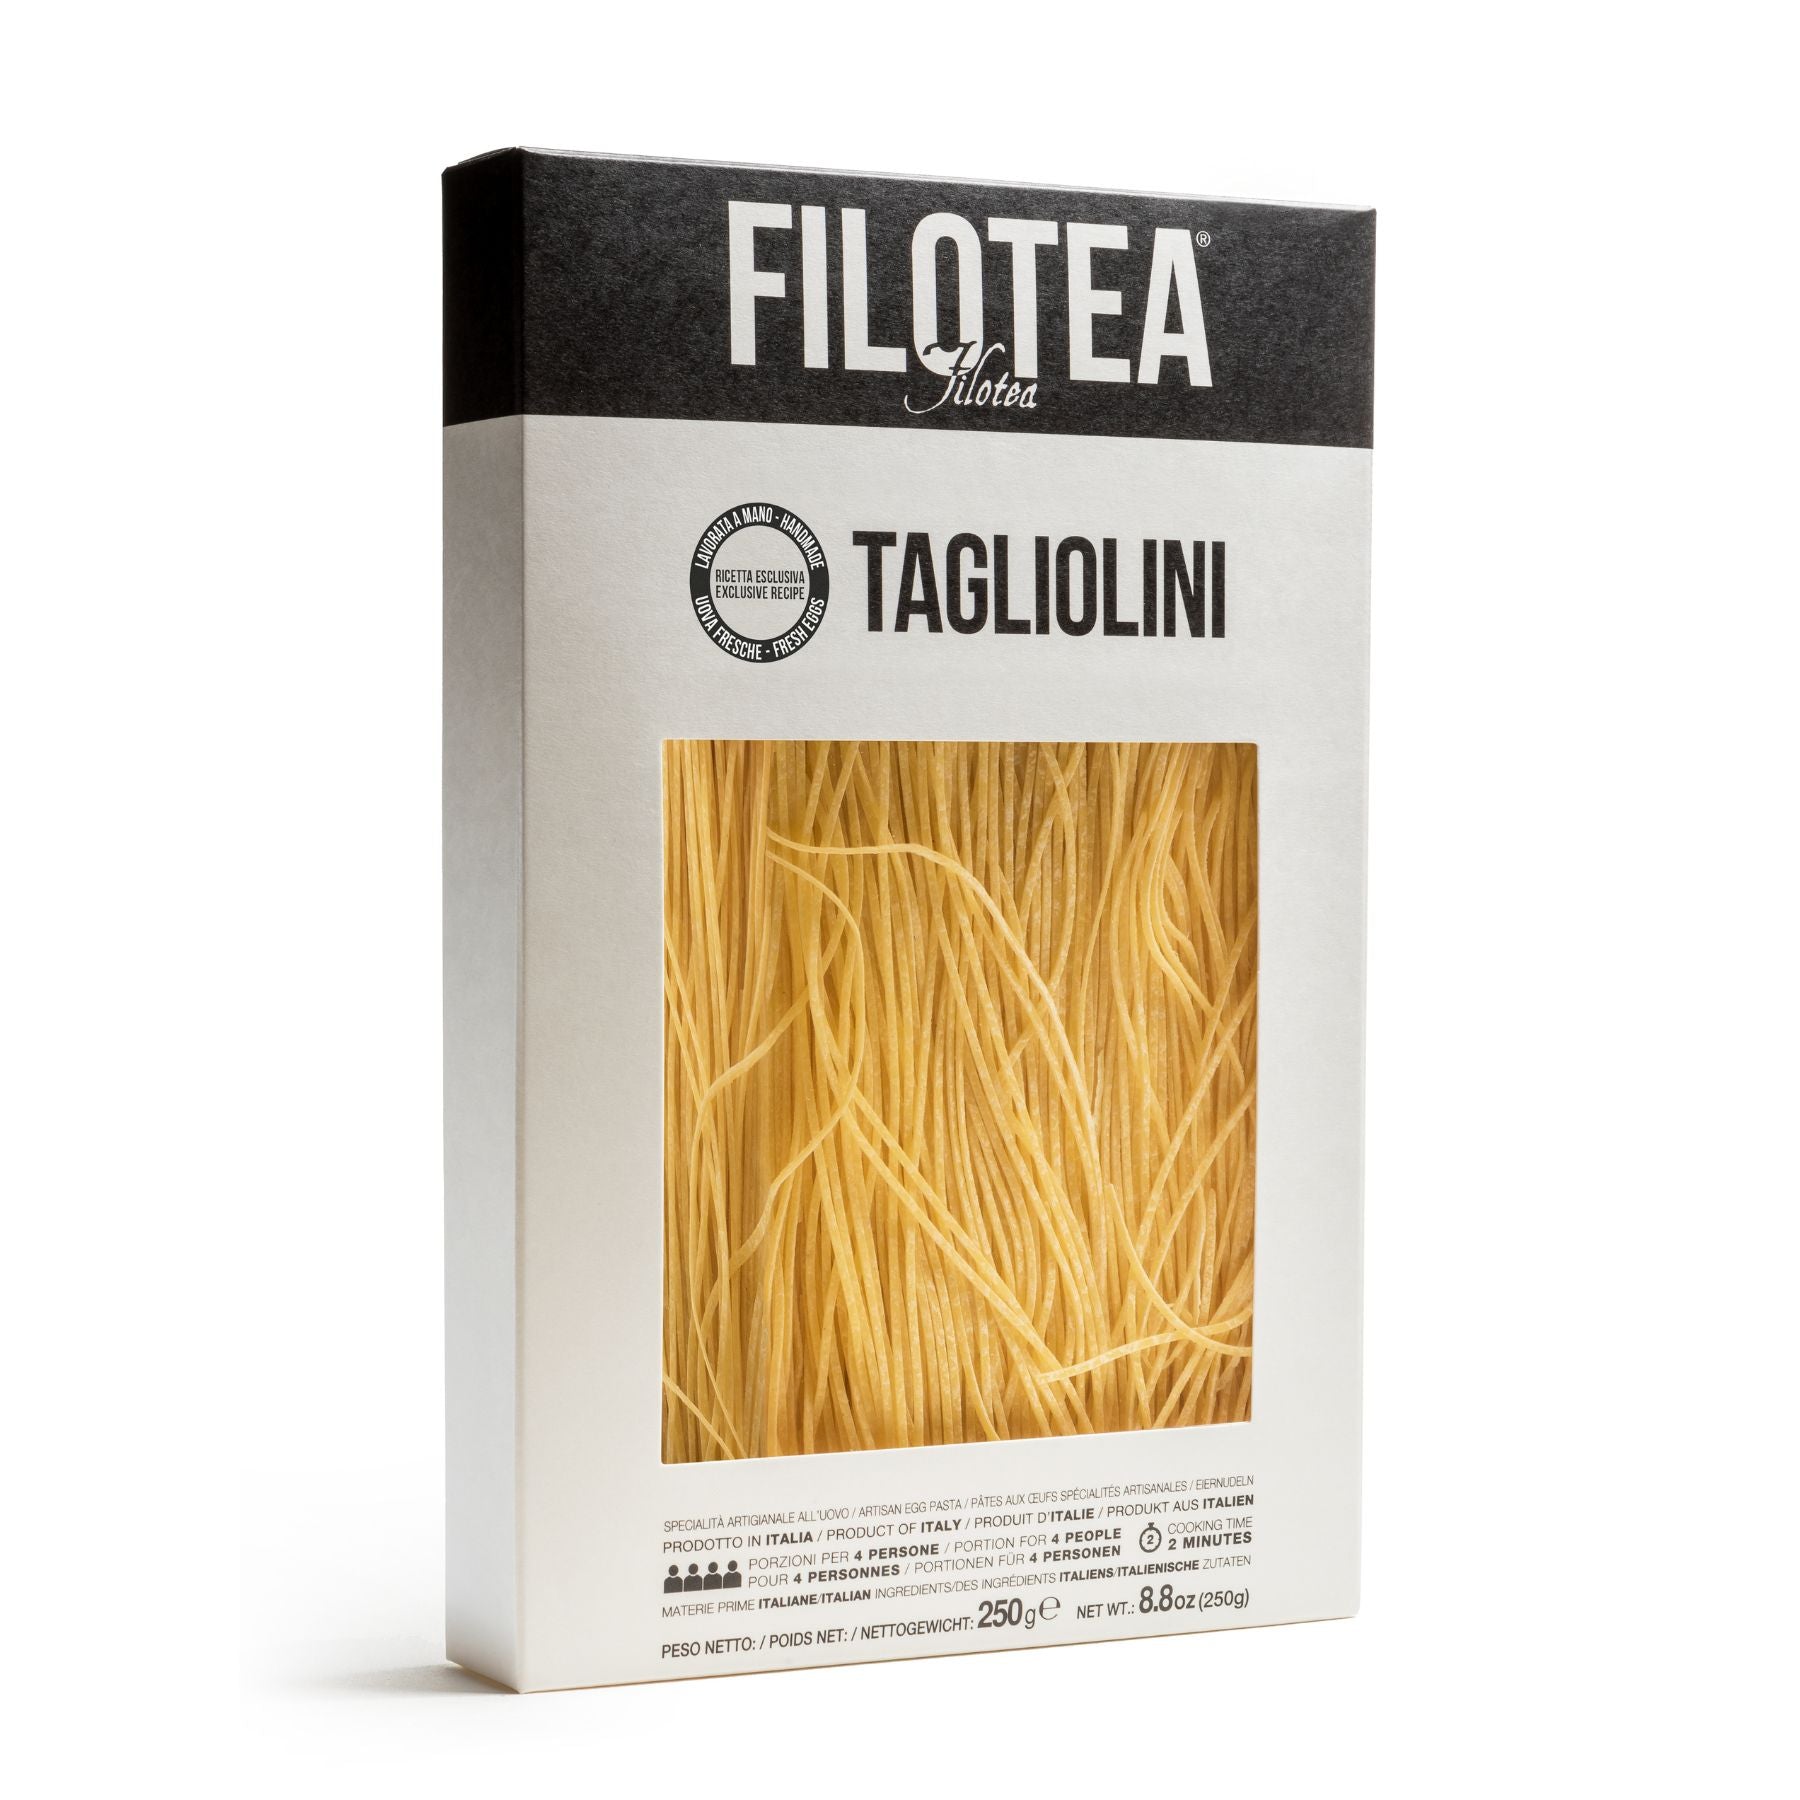 Filotea Tagliolini Artisan Egg Pasta 250g | Imported and distributed in the UK by Just Gourmet Foods